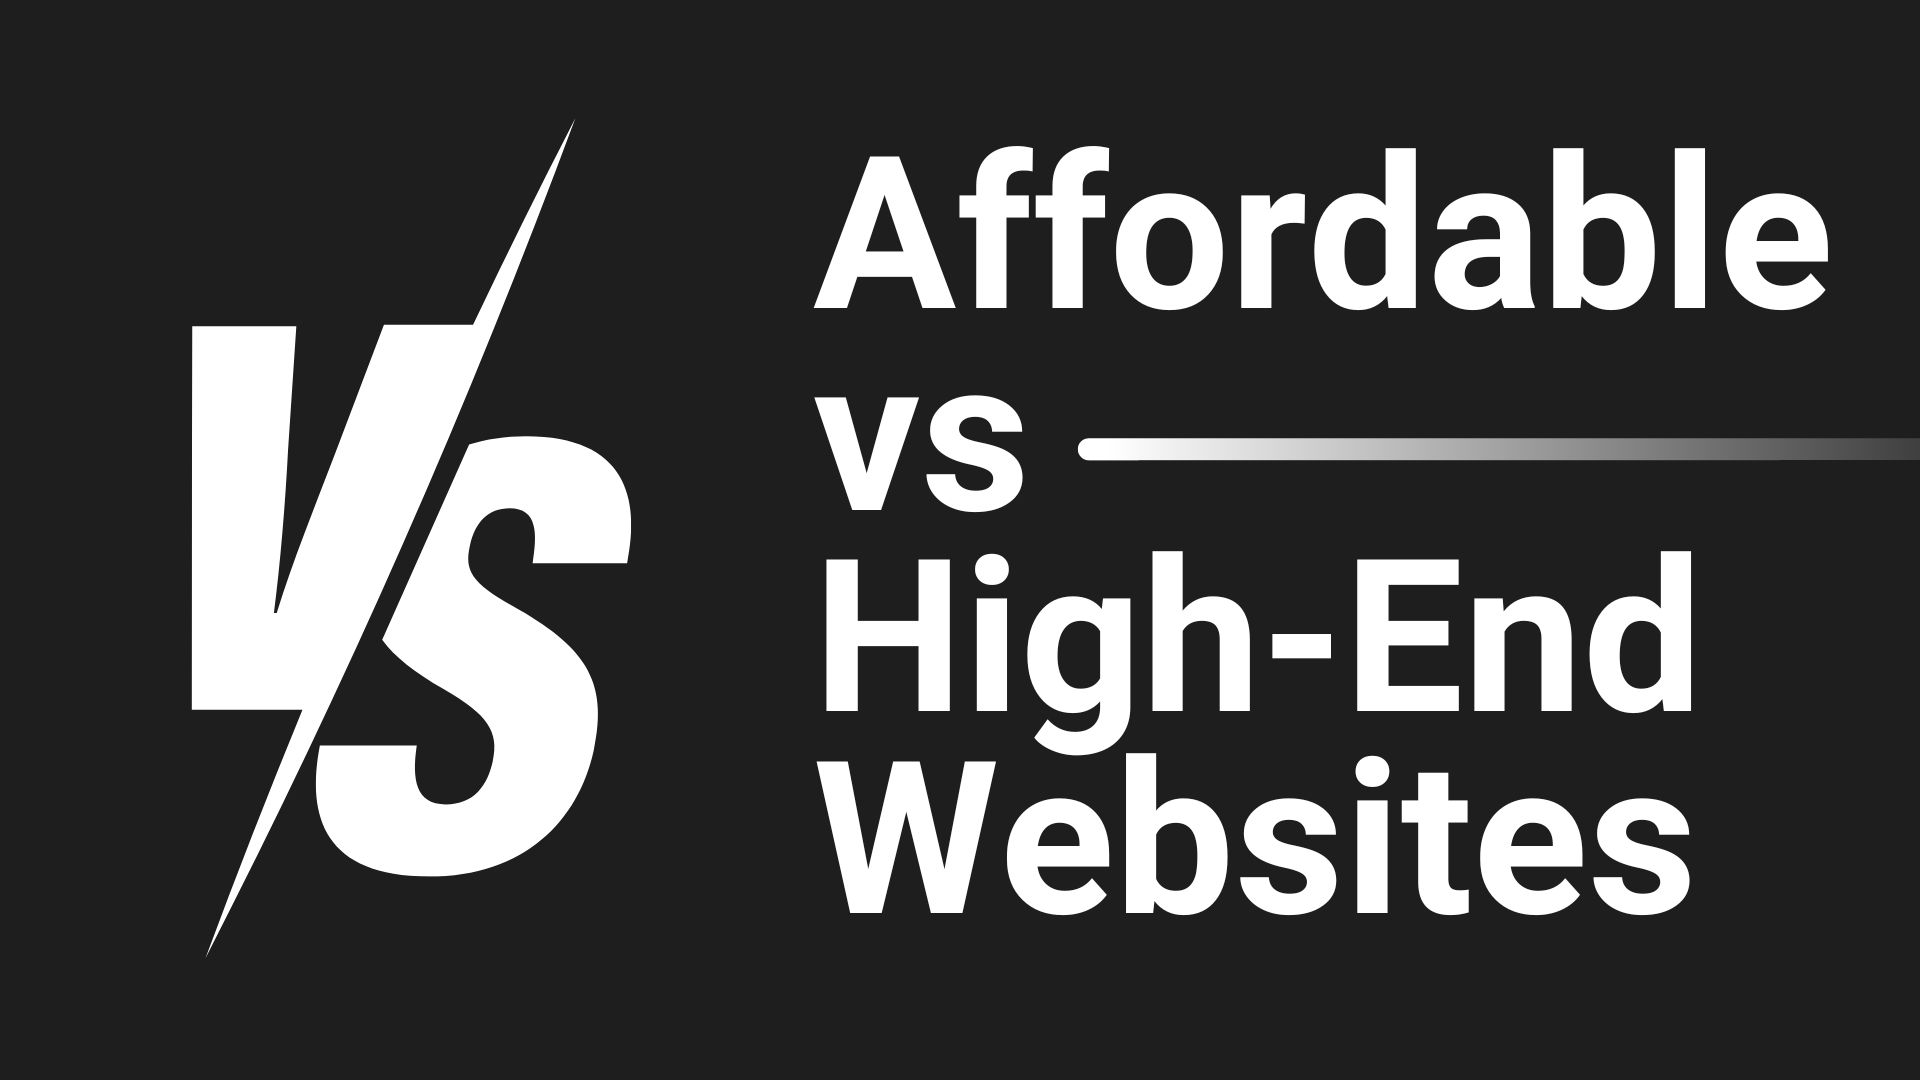 Affordable vs High-End Websites: Analyzing the Gap